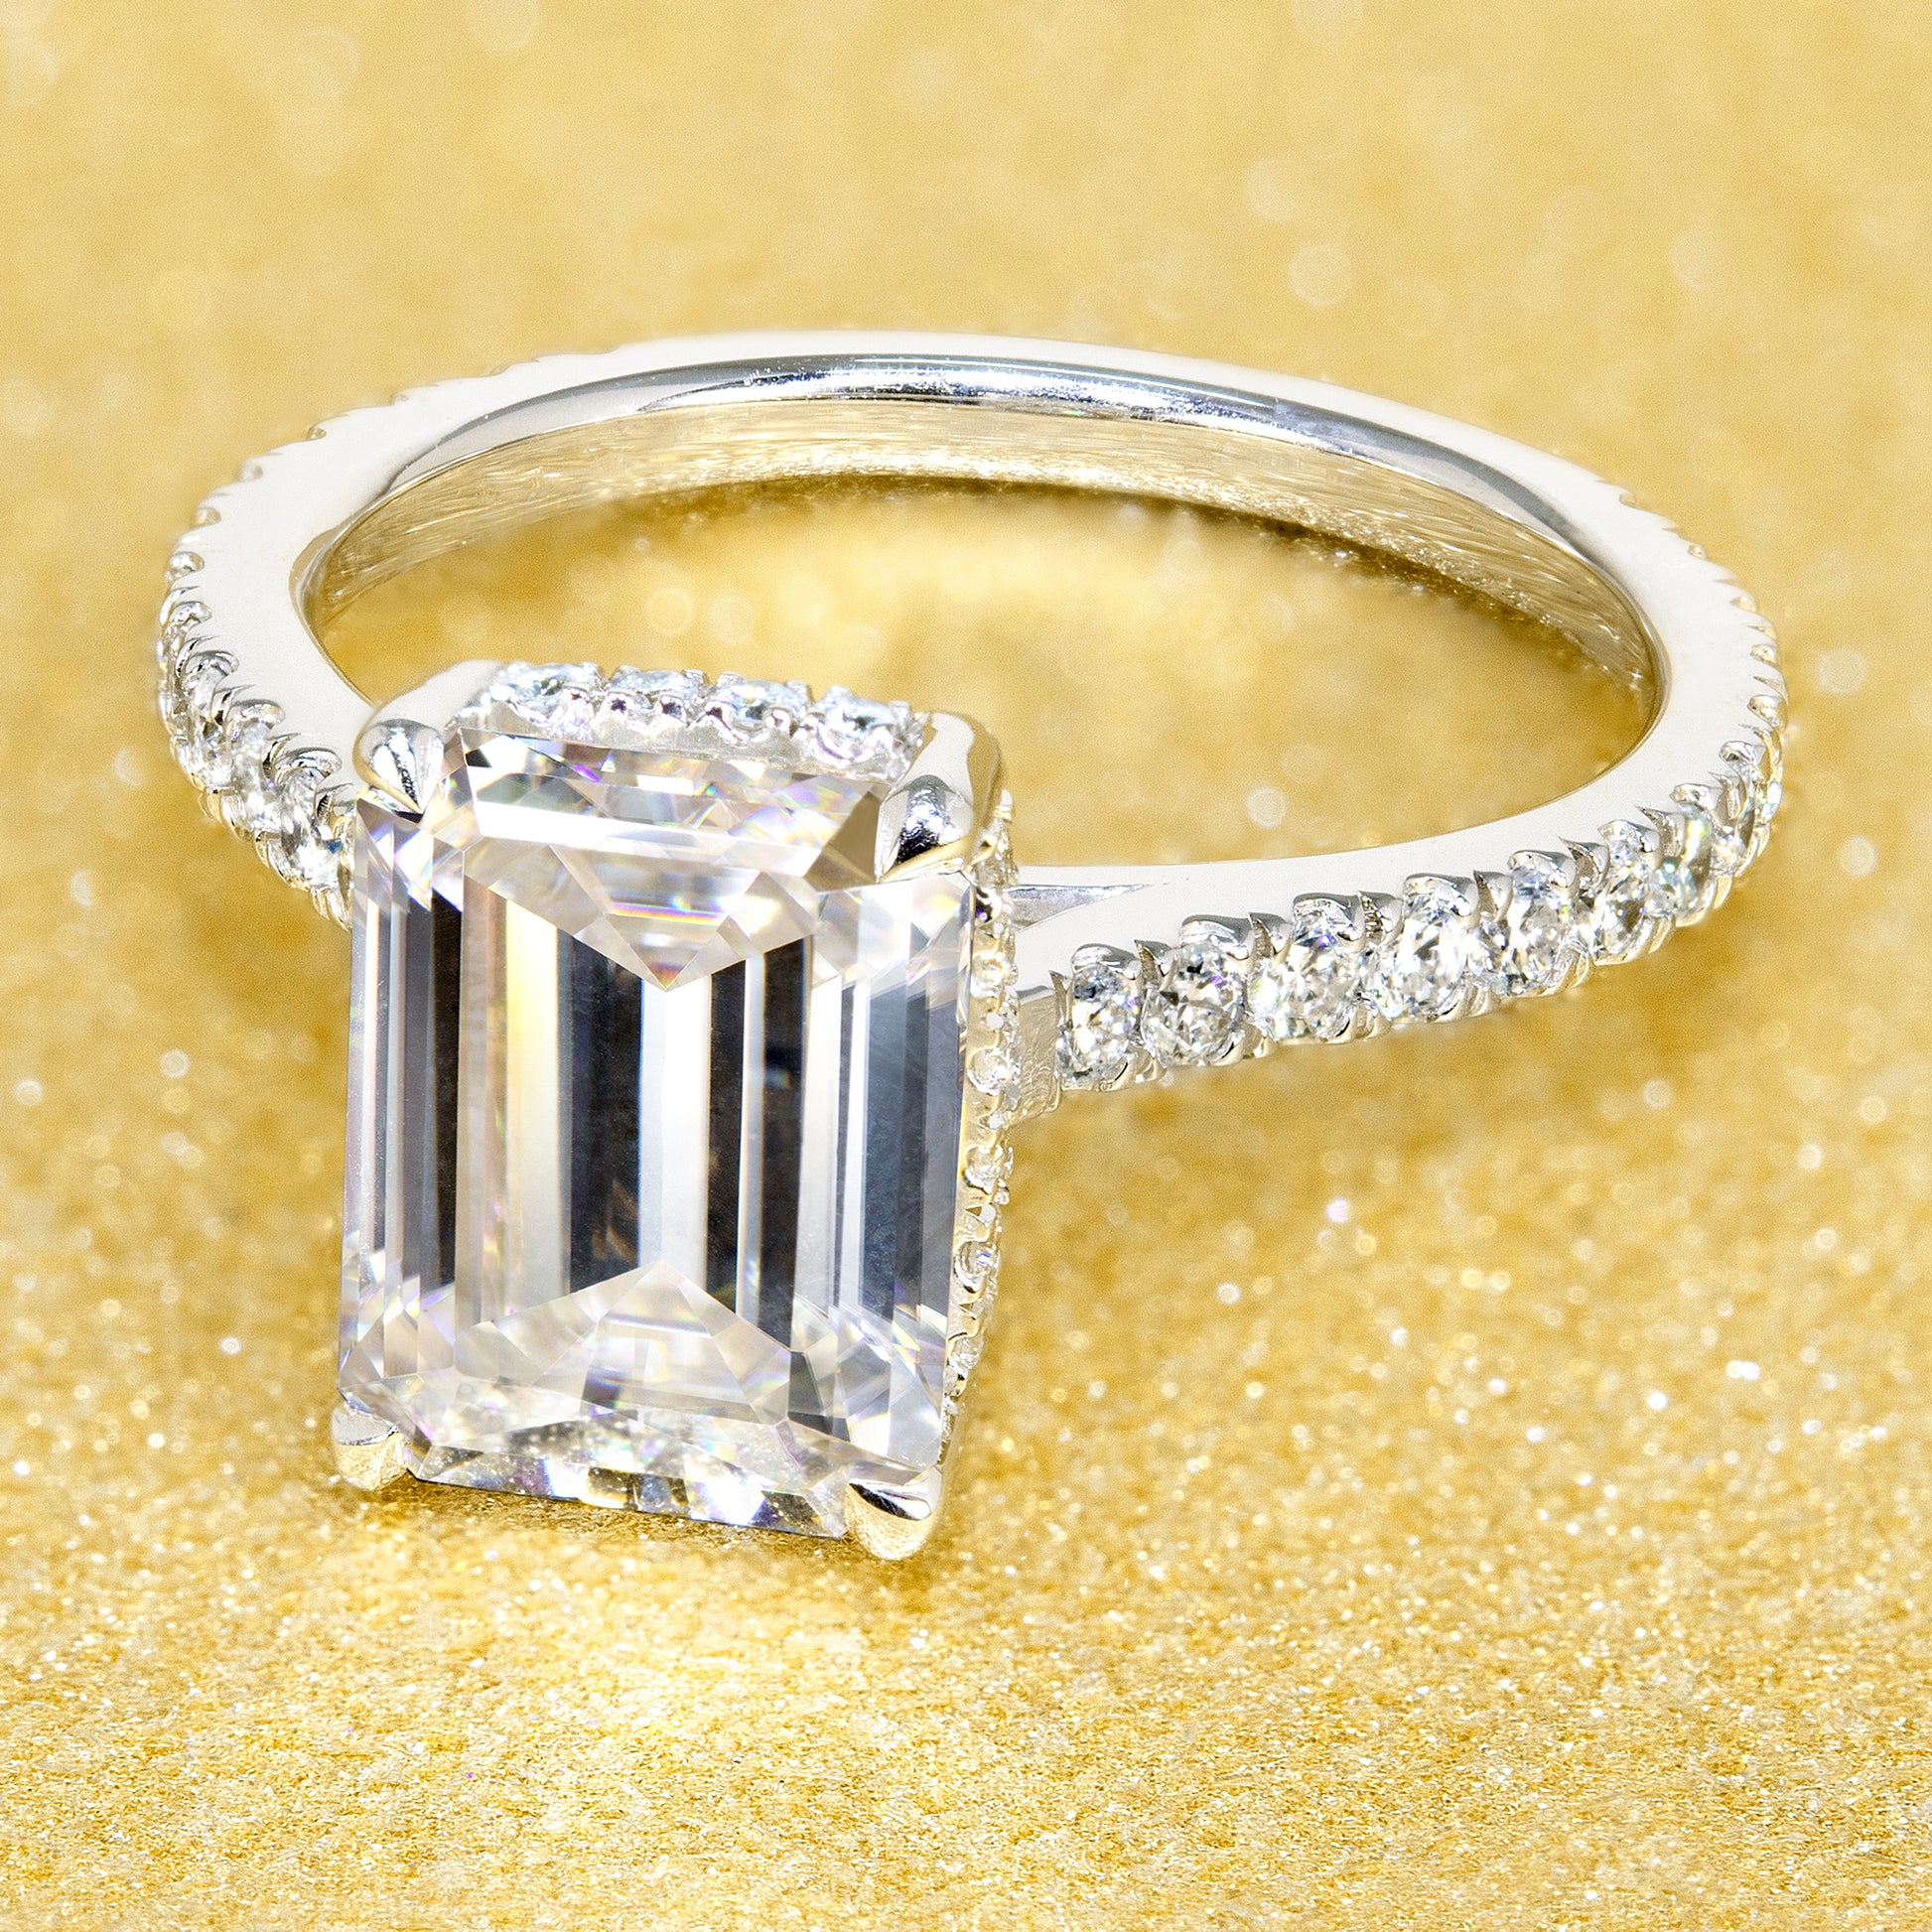 2.5ct Emerald-cut Hidden Halo Engagement Ring | Earthena Jewelry